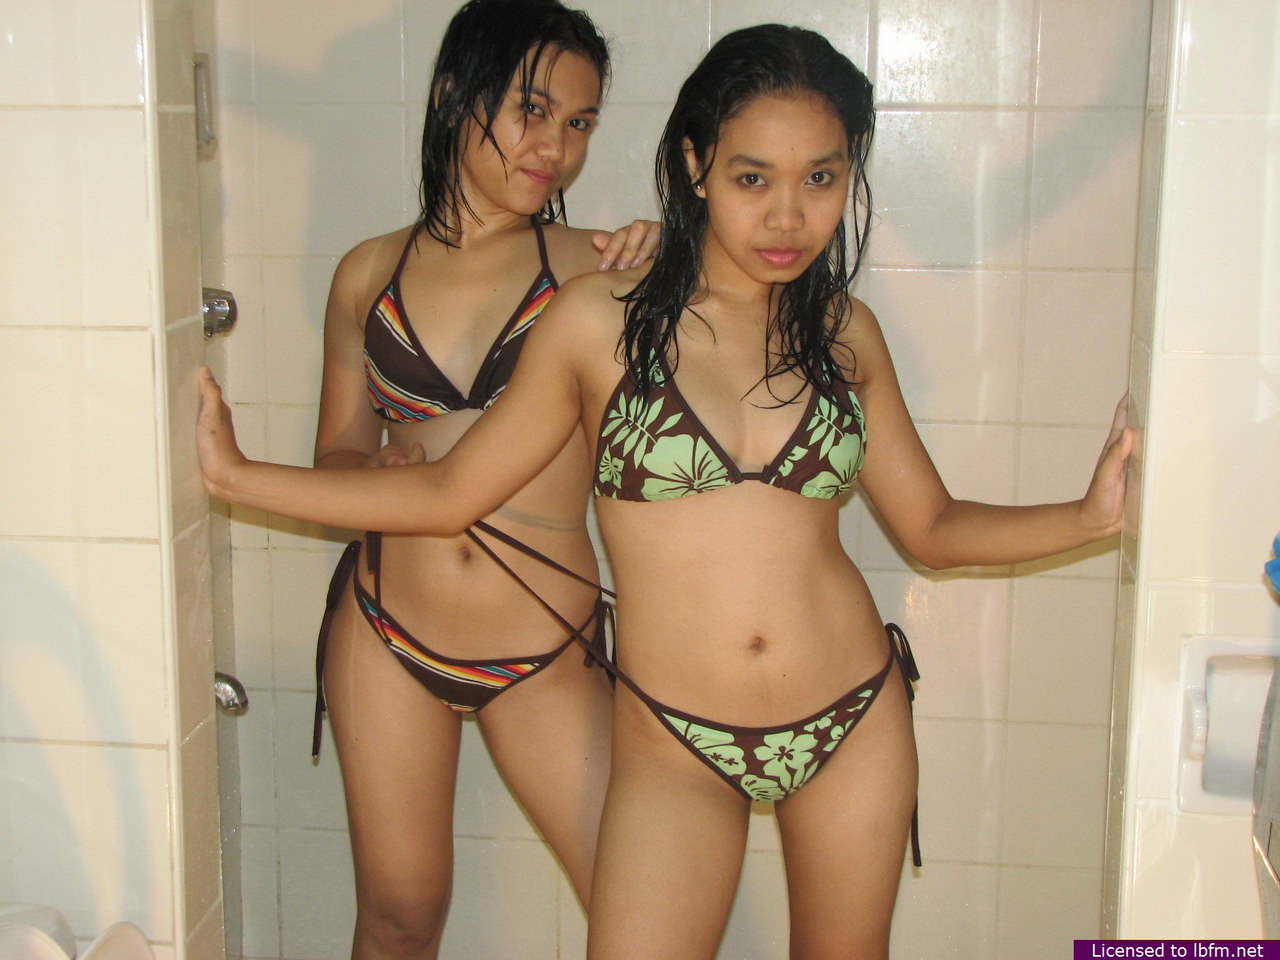 Young Asian amateurs share a lesbian kiss while getting naked in the shower 포르노 사진 #426676970 | LBFM Pics, Tiny Tits, 모바일 포르노